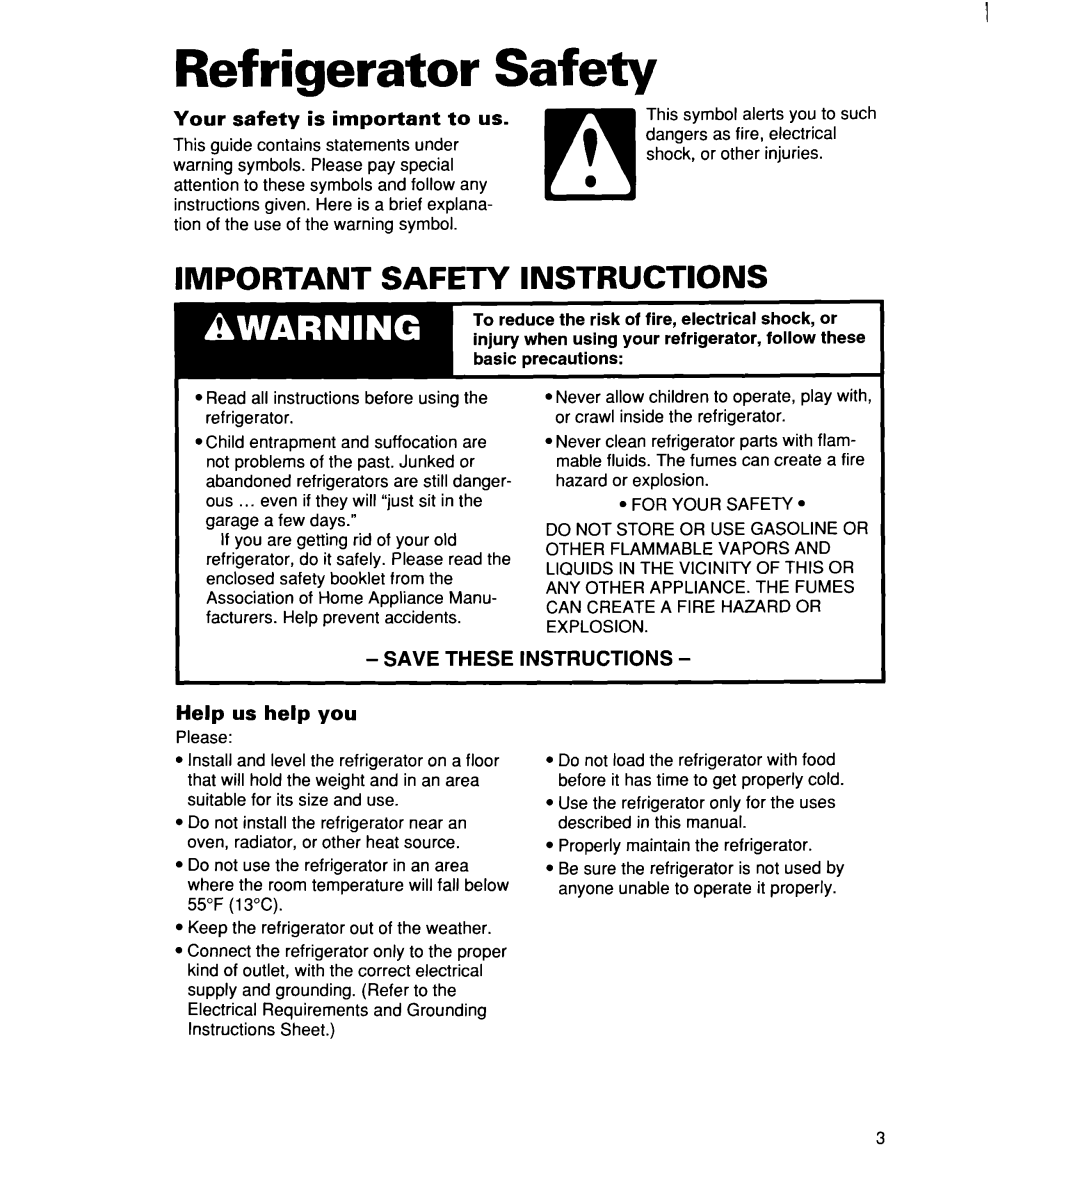 Whirlpool 2194182 Refrigerator Safety, Important Safety Instructions, Your safety is important to us, Help us help you 